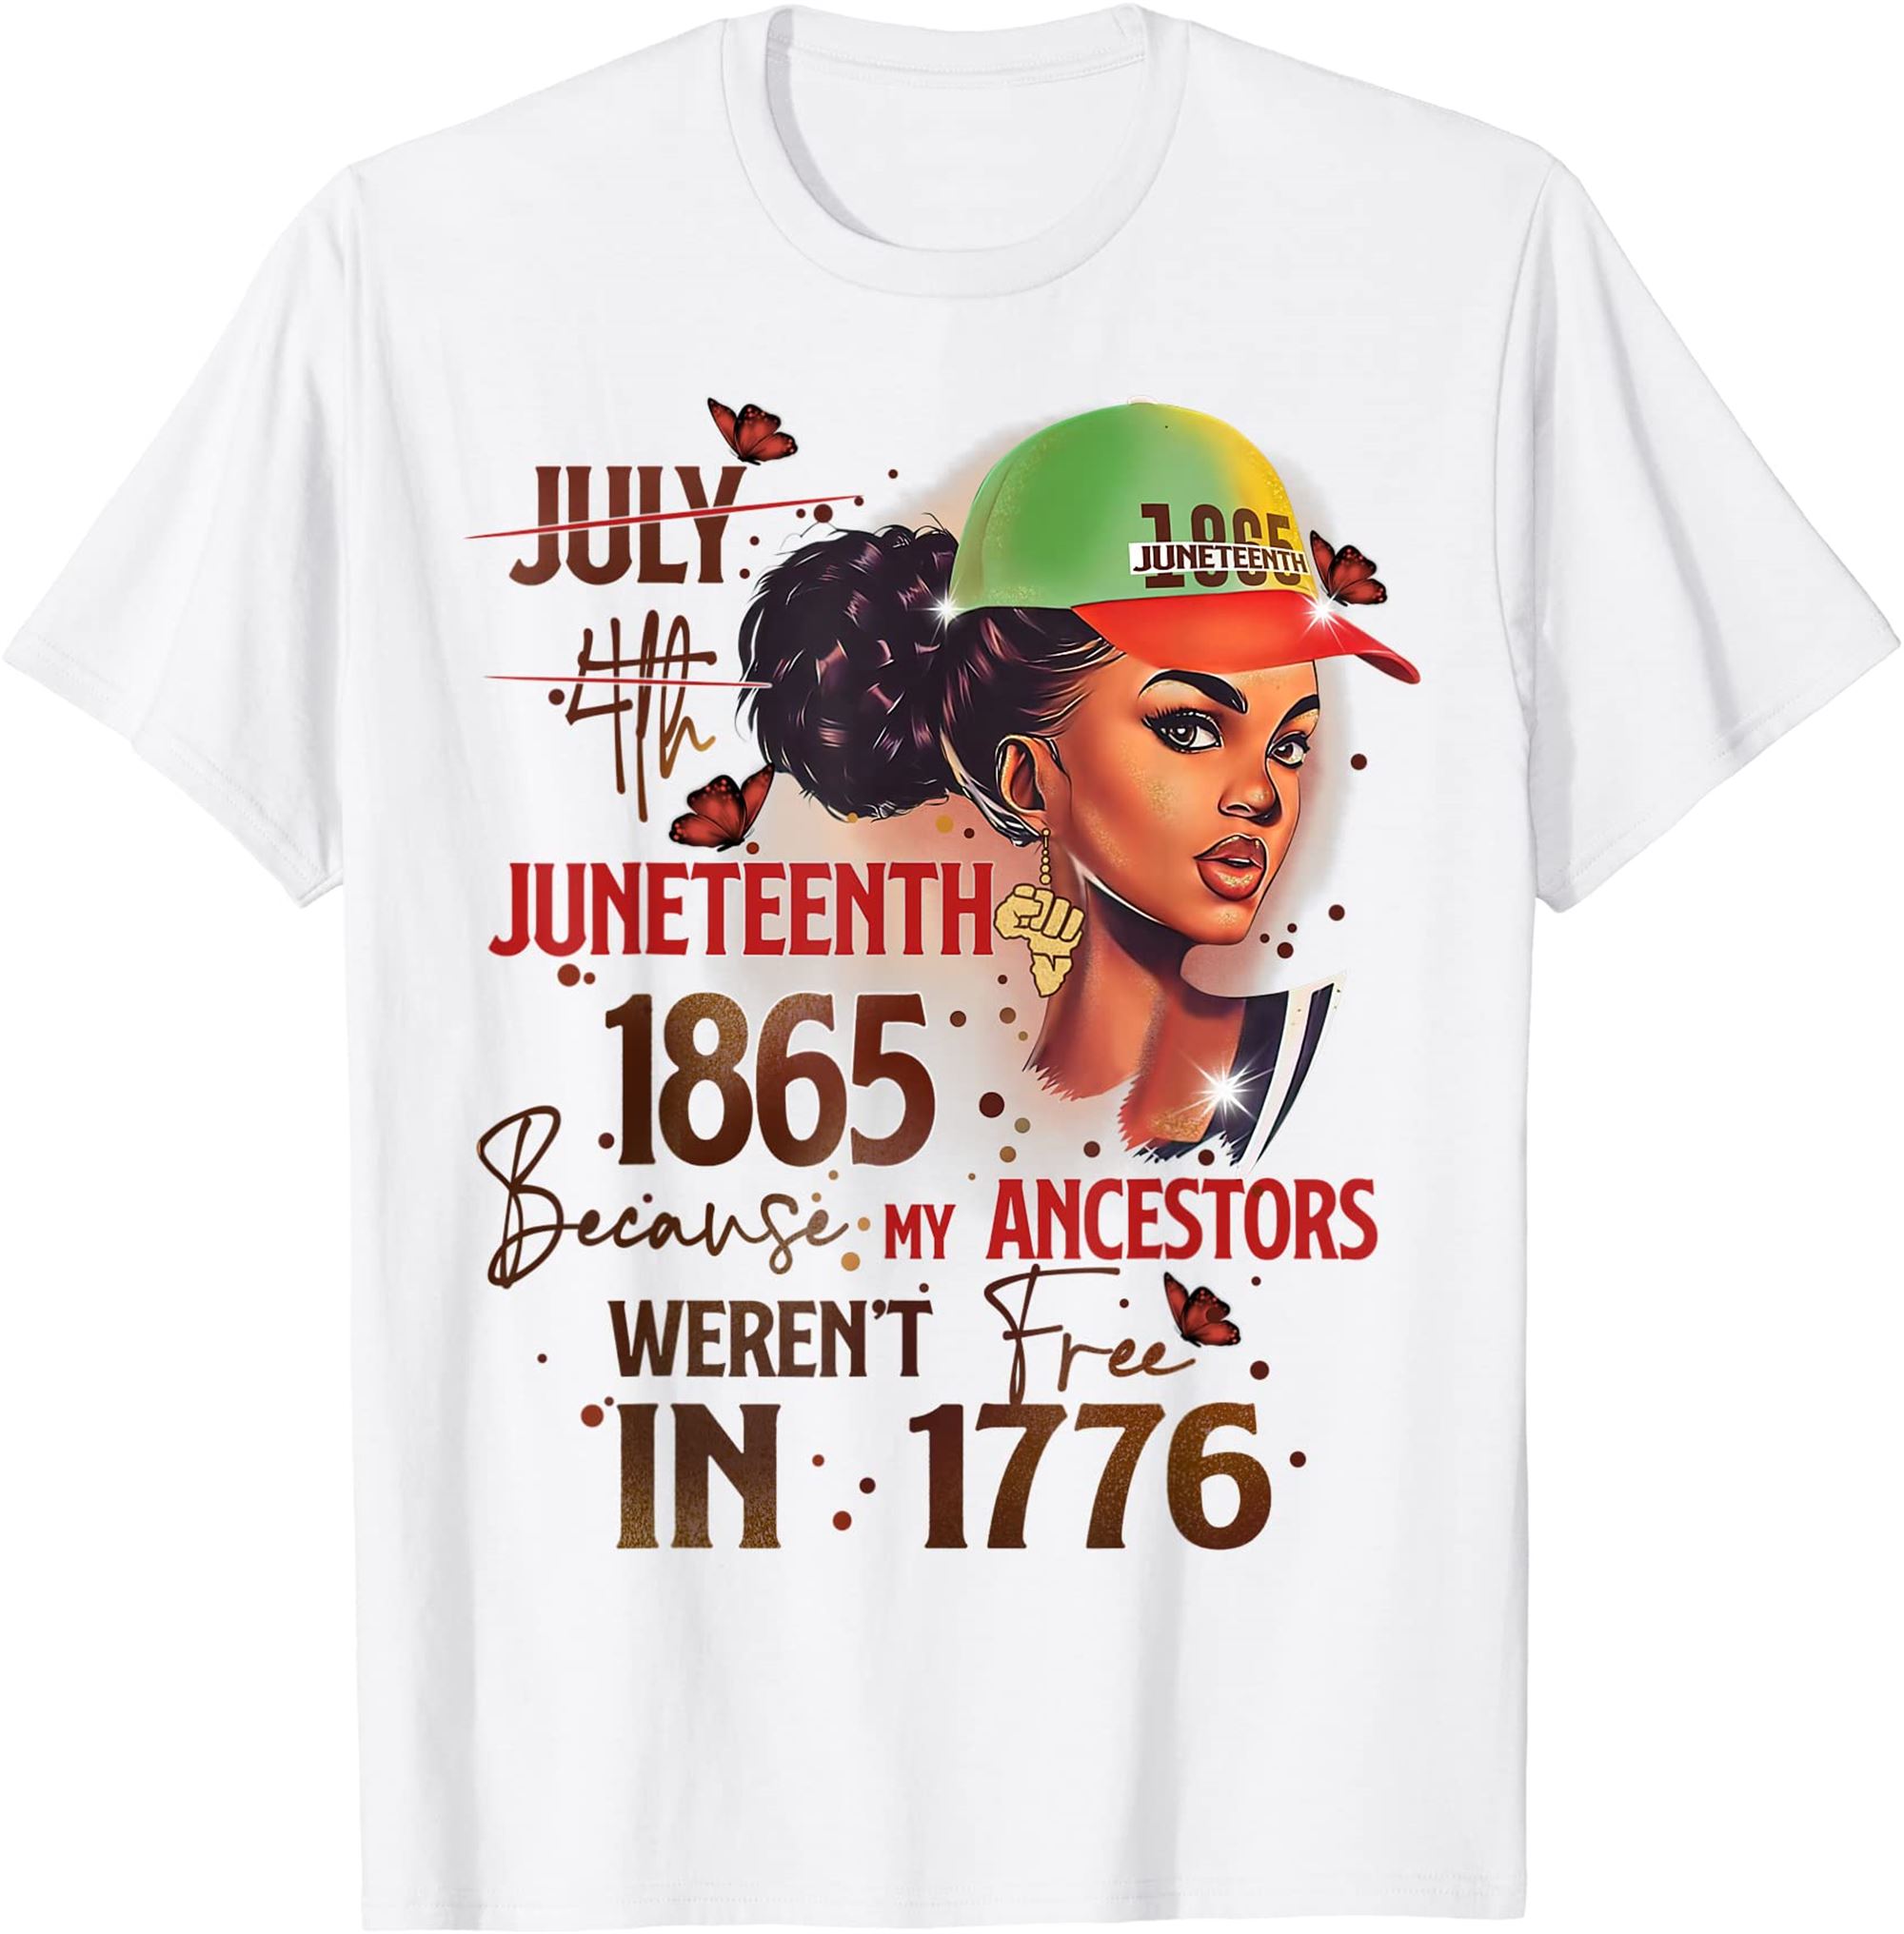 Remembering My Ancestors Juneteenth Black Freedom 1865 Gift T-shirt Plus Size Up To 5xl